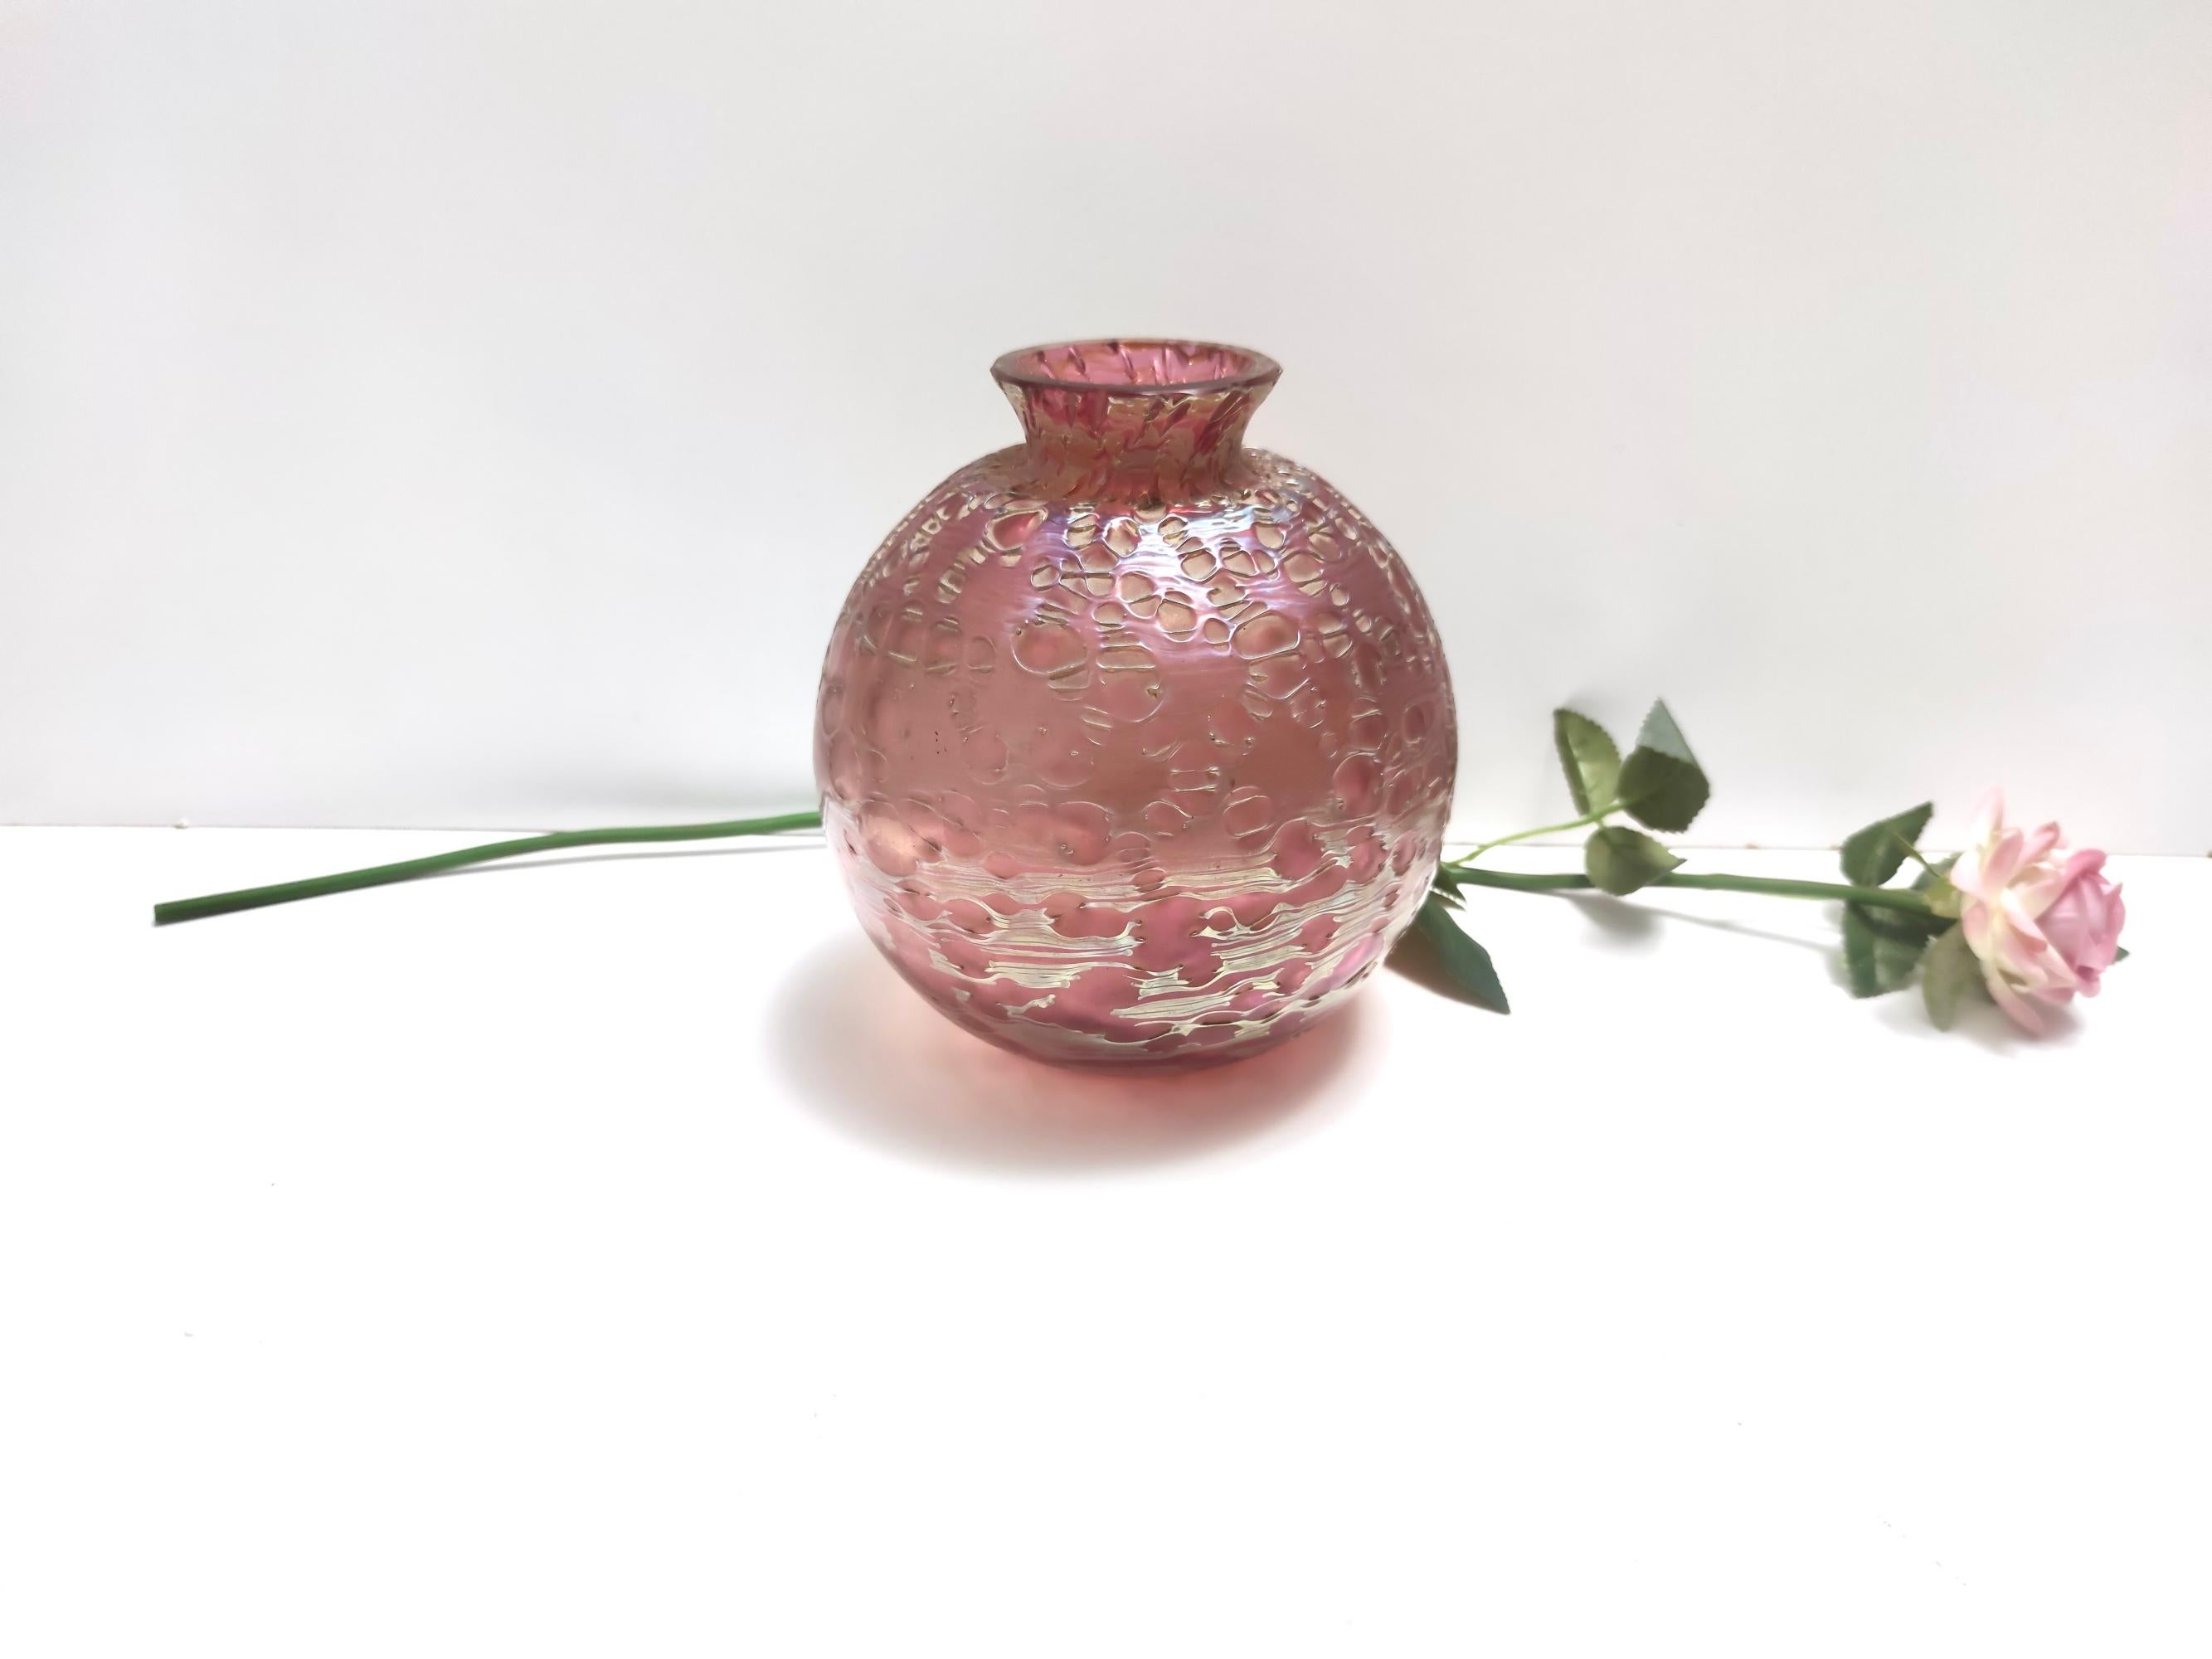 Made in pink etched blown glass with iridescent and material effects. 
It is a vintage item, therefore it might show slight traces of use, but it can be considered as in very good original condition and ready to become a piece in a home.

Measure: